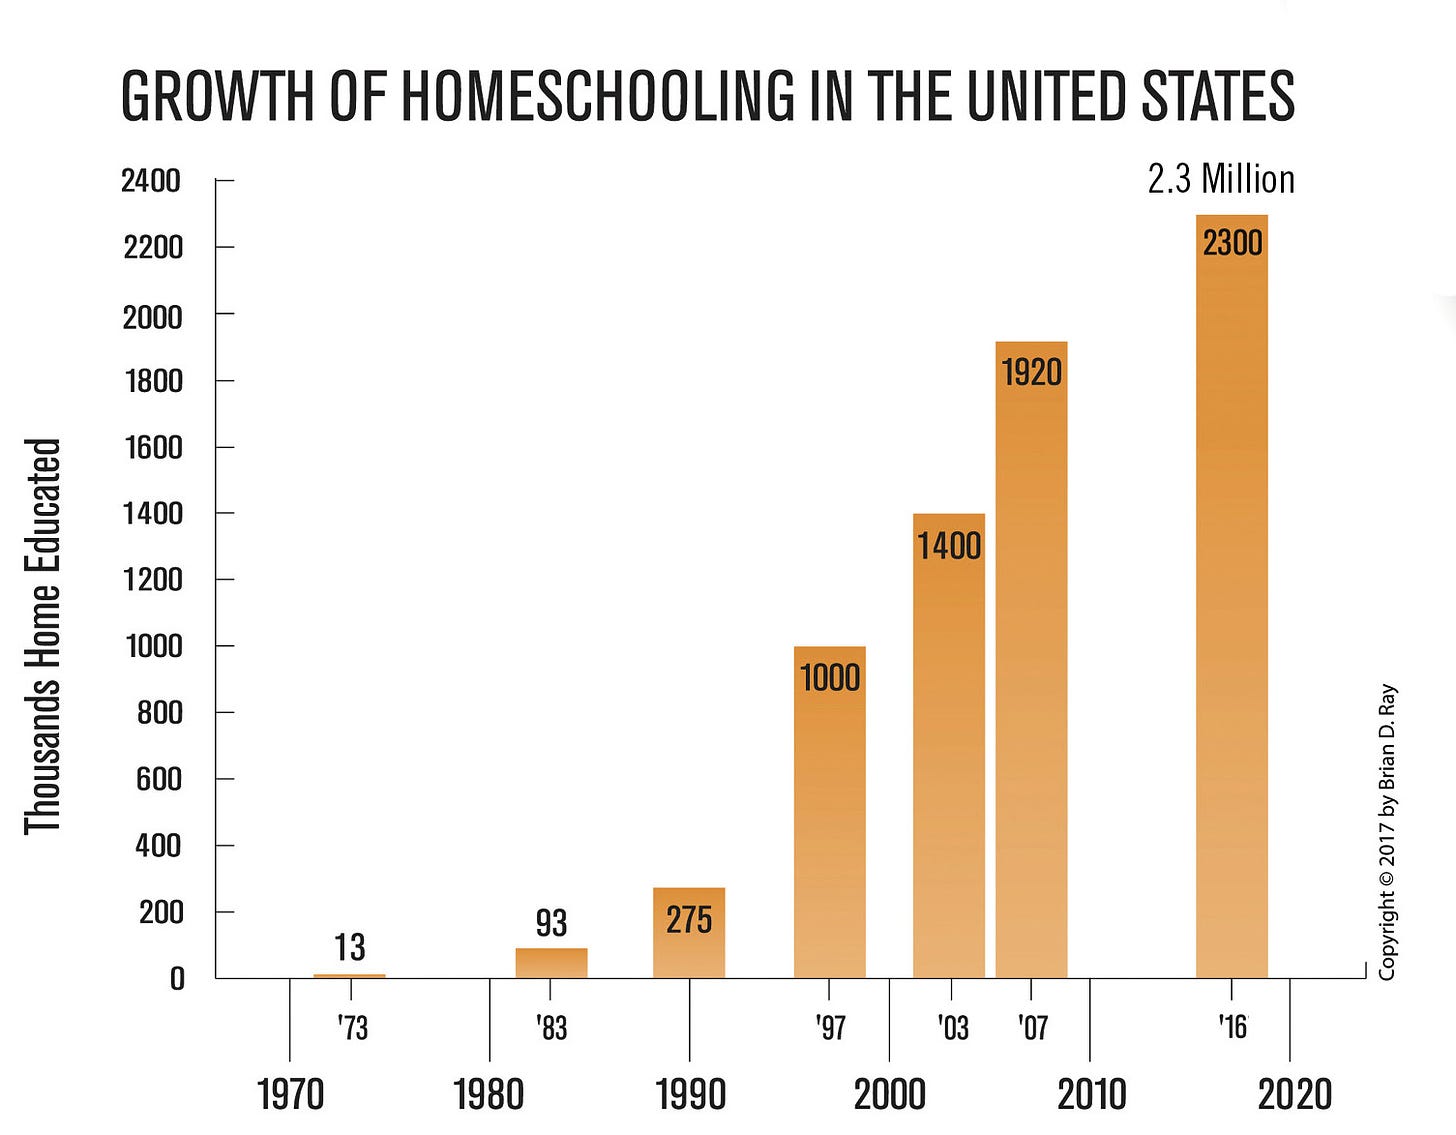 Image result from https://www.nheri.org/homeschool-population-size-growing/fig01-growthofhomeschoolinguswithlabel-1/